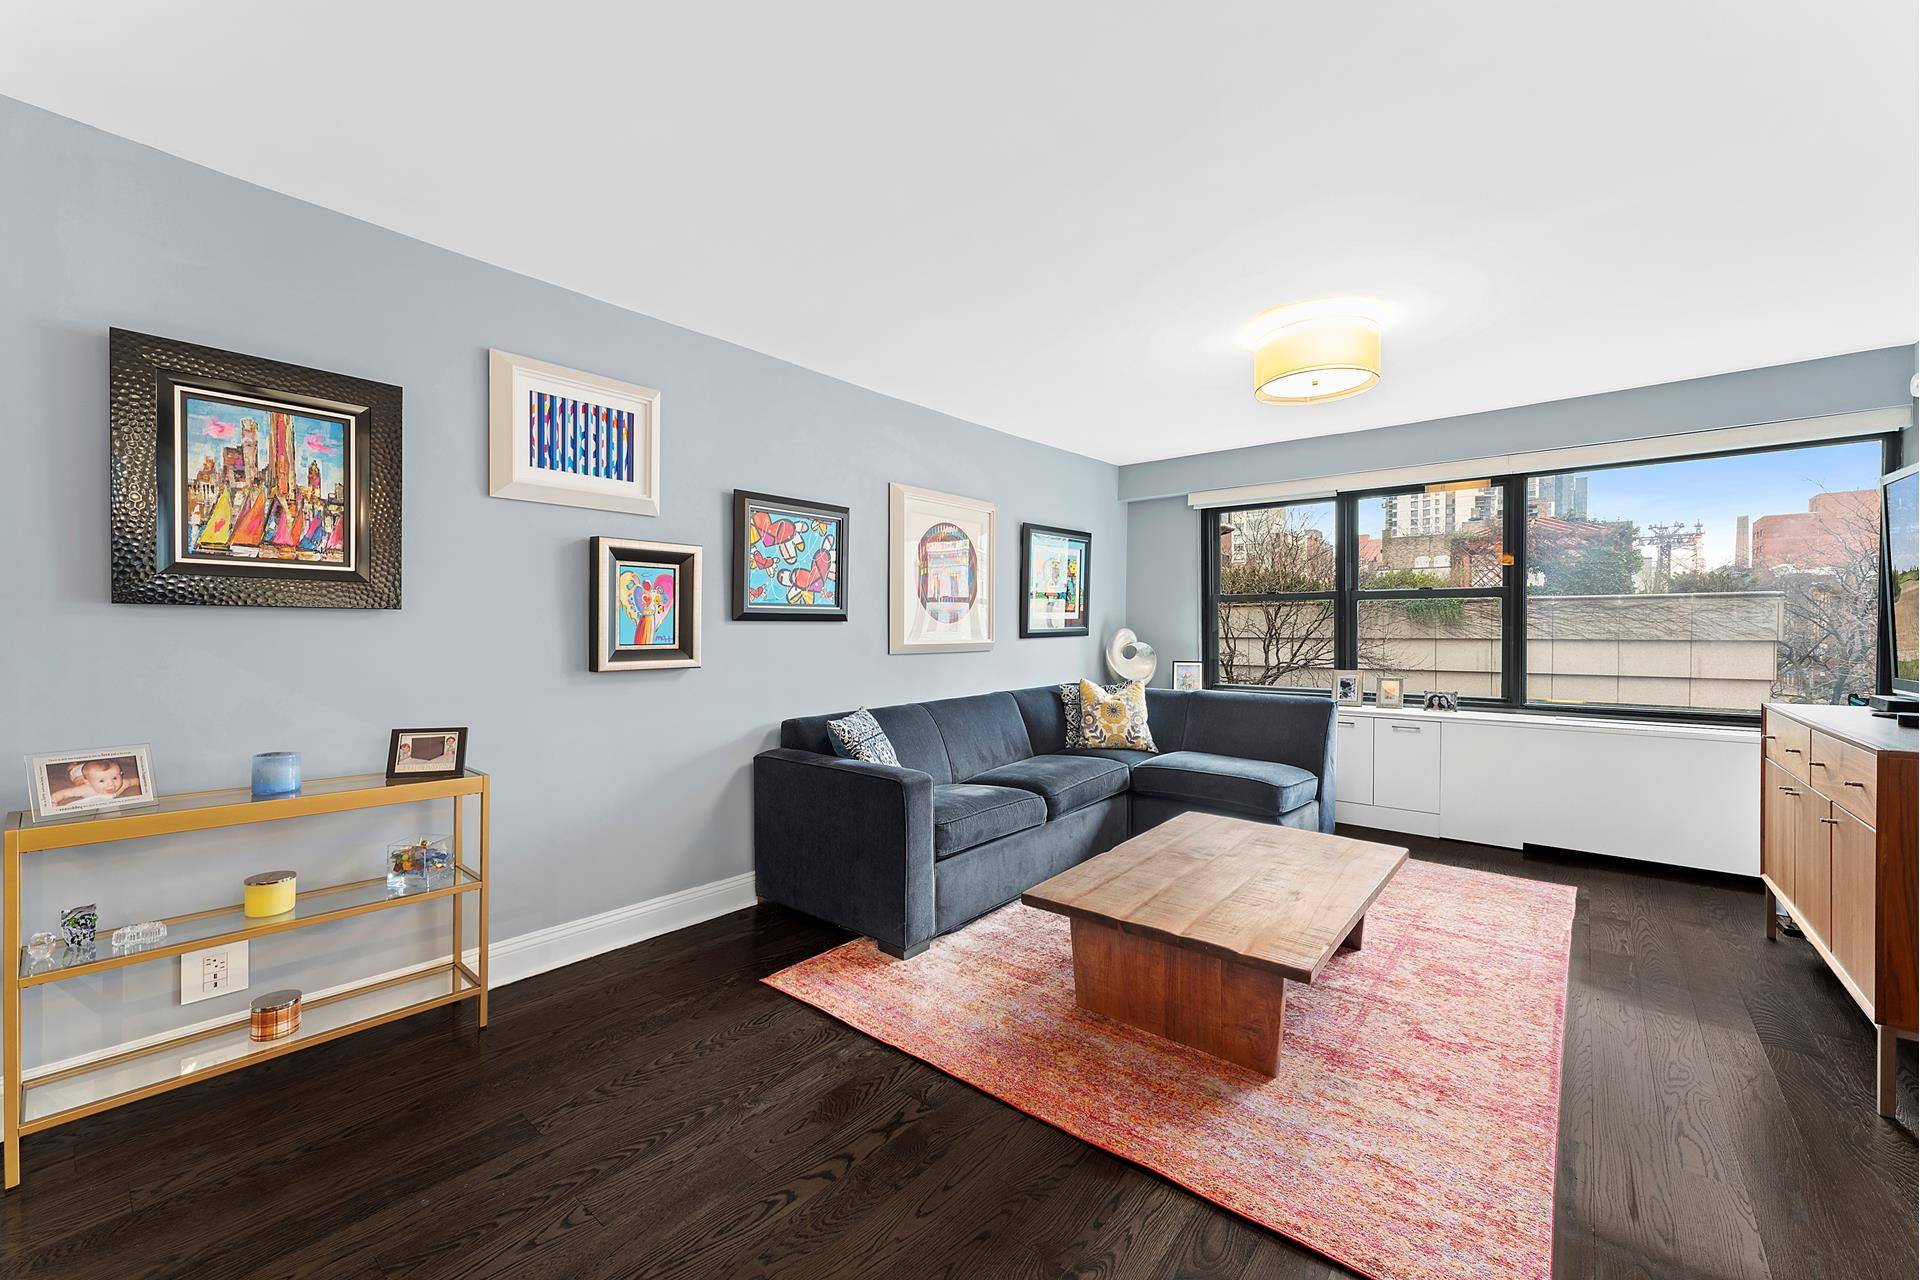 A truly rare find this immaculately renovated three bedroom treasure, with an abundance of natural light, is in an ideal Upper East Side location.